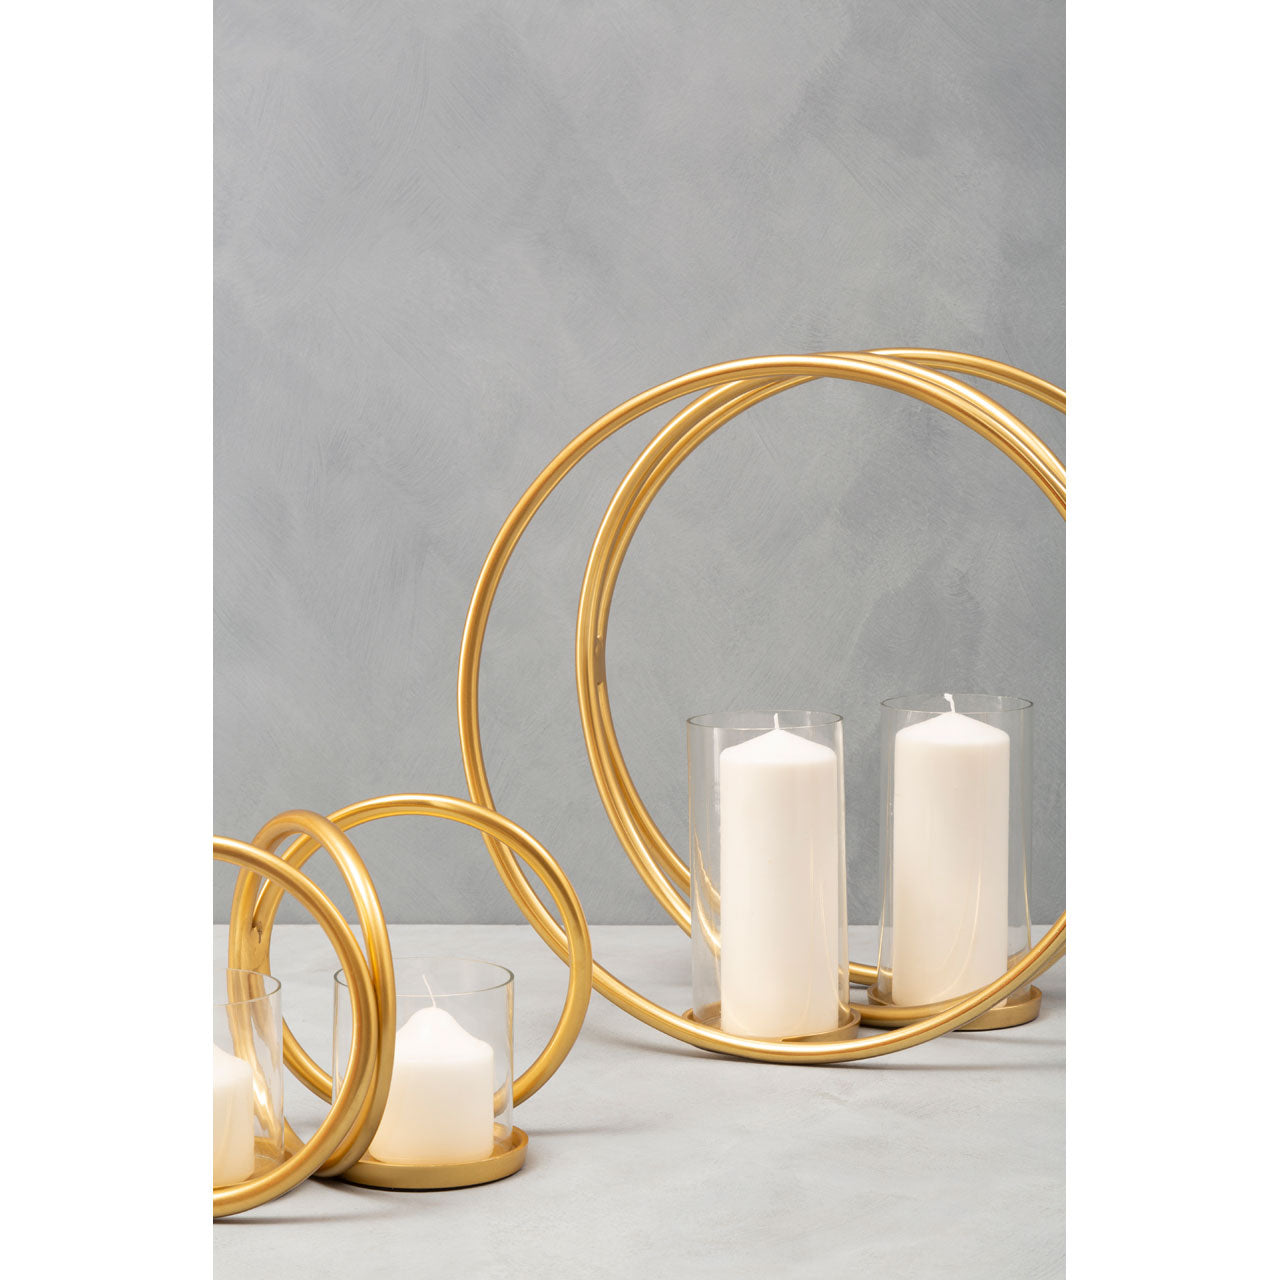 Olivia's Boutique Hotel Collection - Double Ring Gold Candle Holder